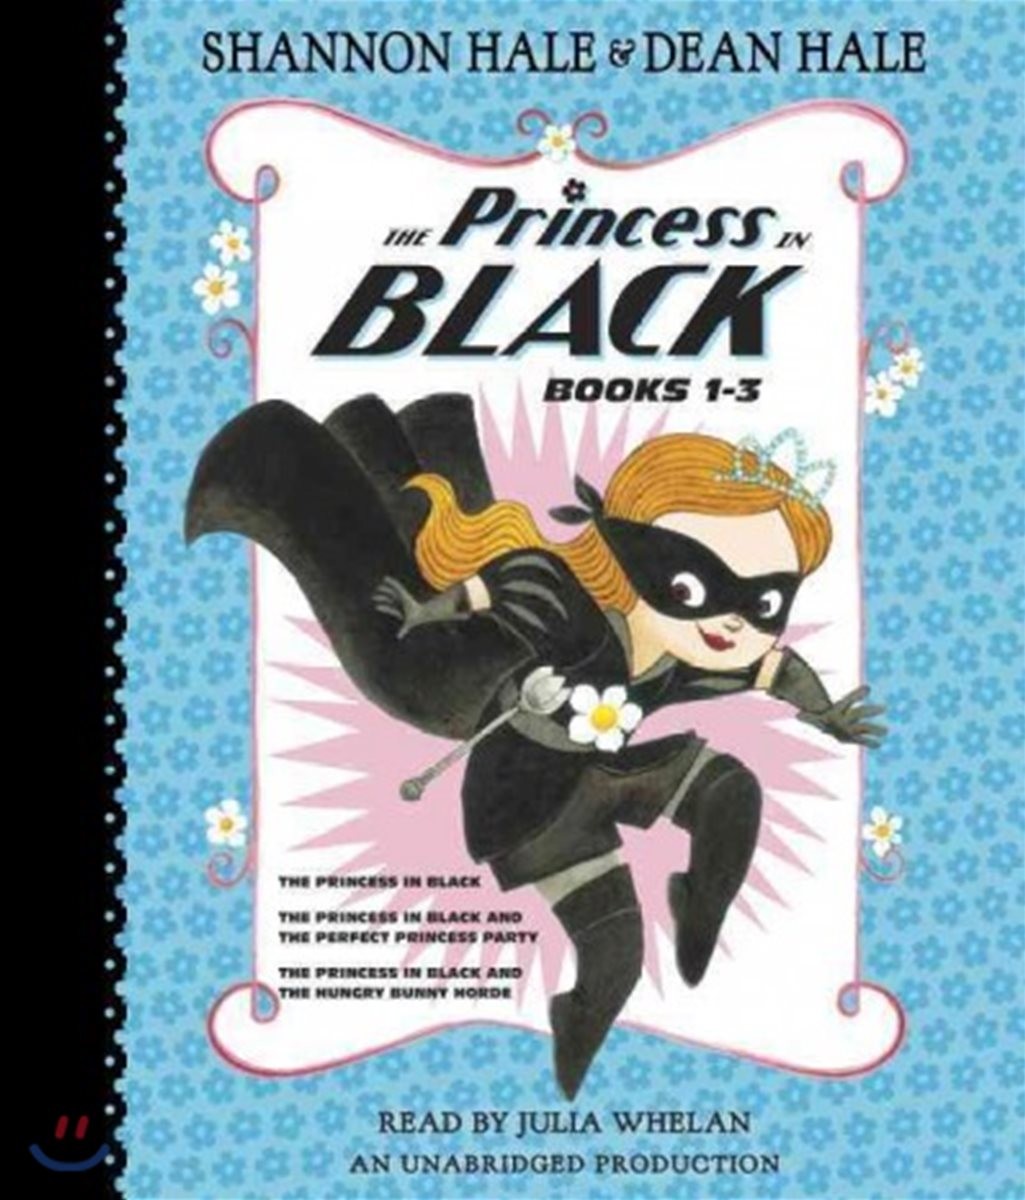 The Princess in Black Books 1-3 (오디오북) (The Princess in Black / the Perfect Princess Party / the Hungry Bunny Horde)